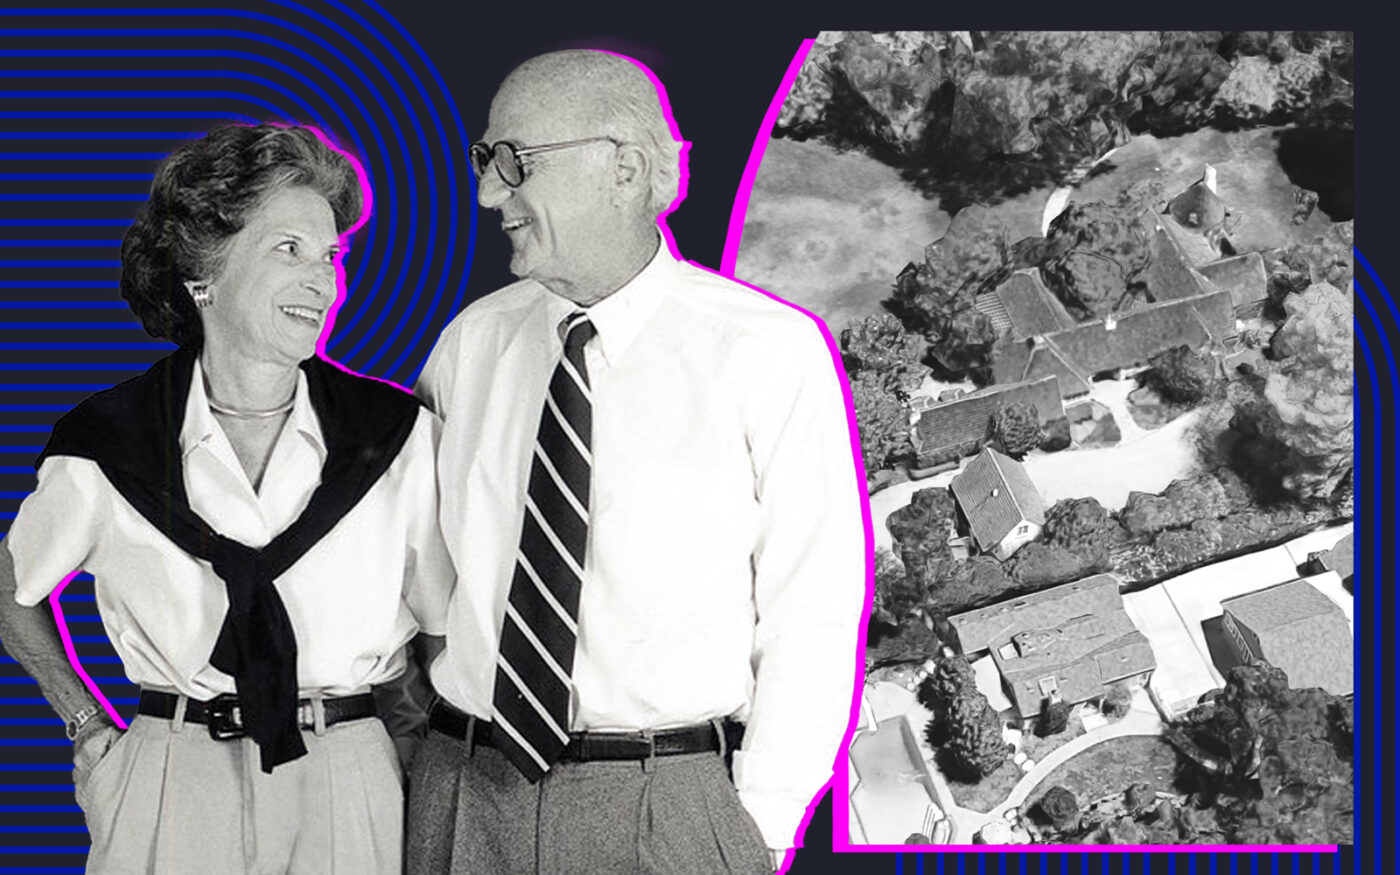 Don and Doris Fisher with 178 Atherton Avenue in Atherton